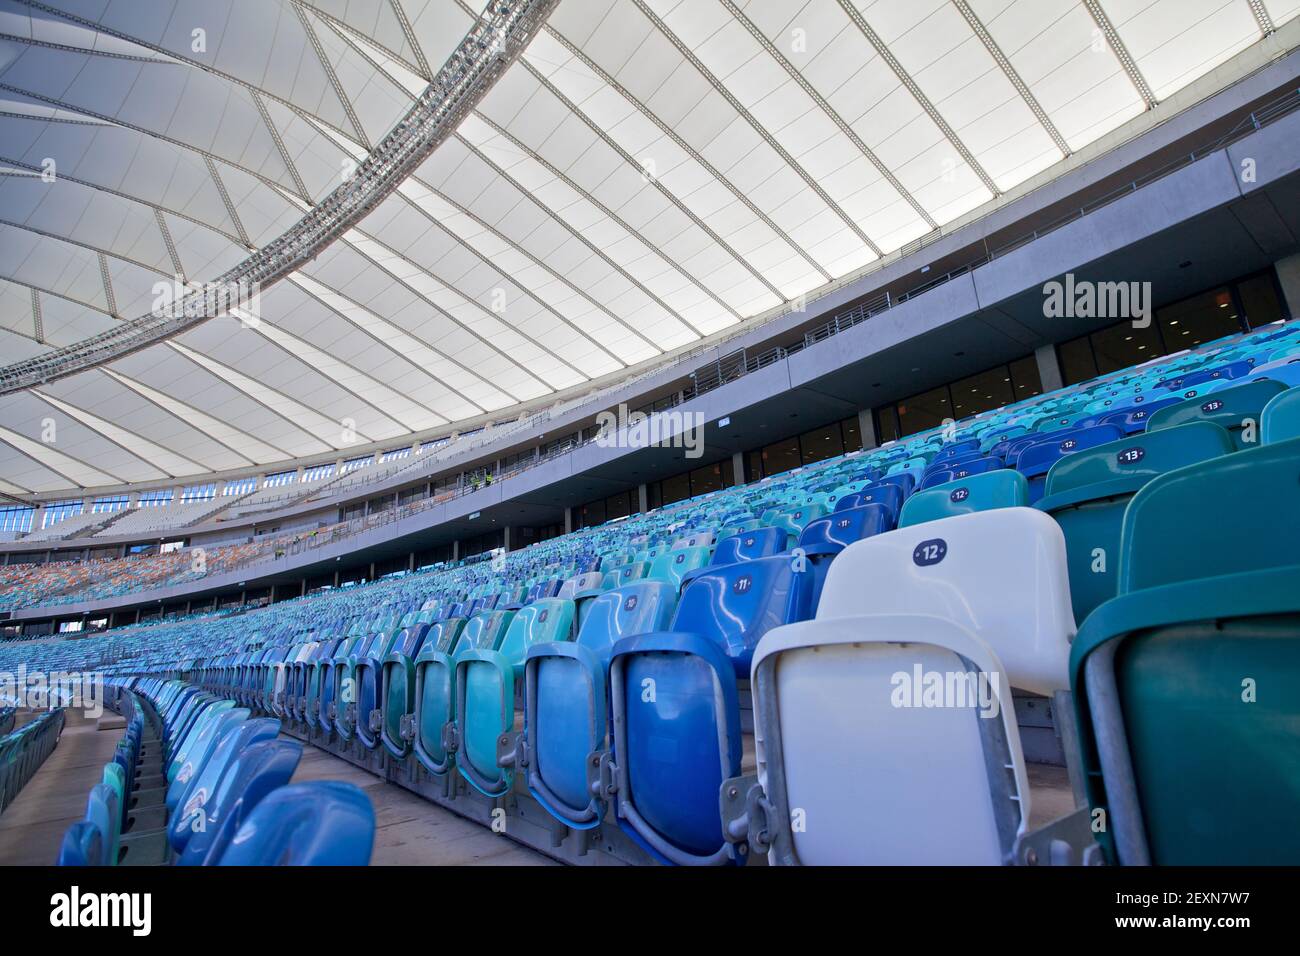 Moses Mabhida Stadium Fifa Football Seating Area and Covered by the Sails Roofing Stock Photo